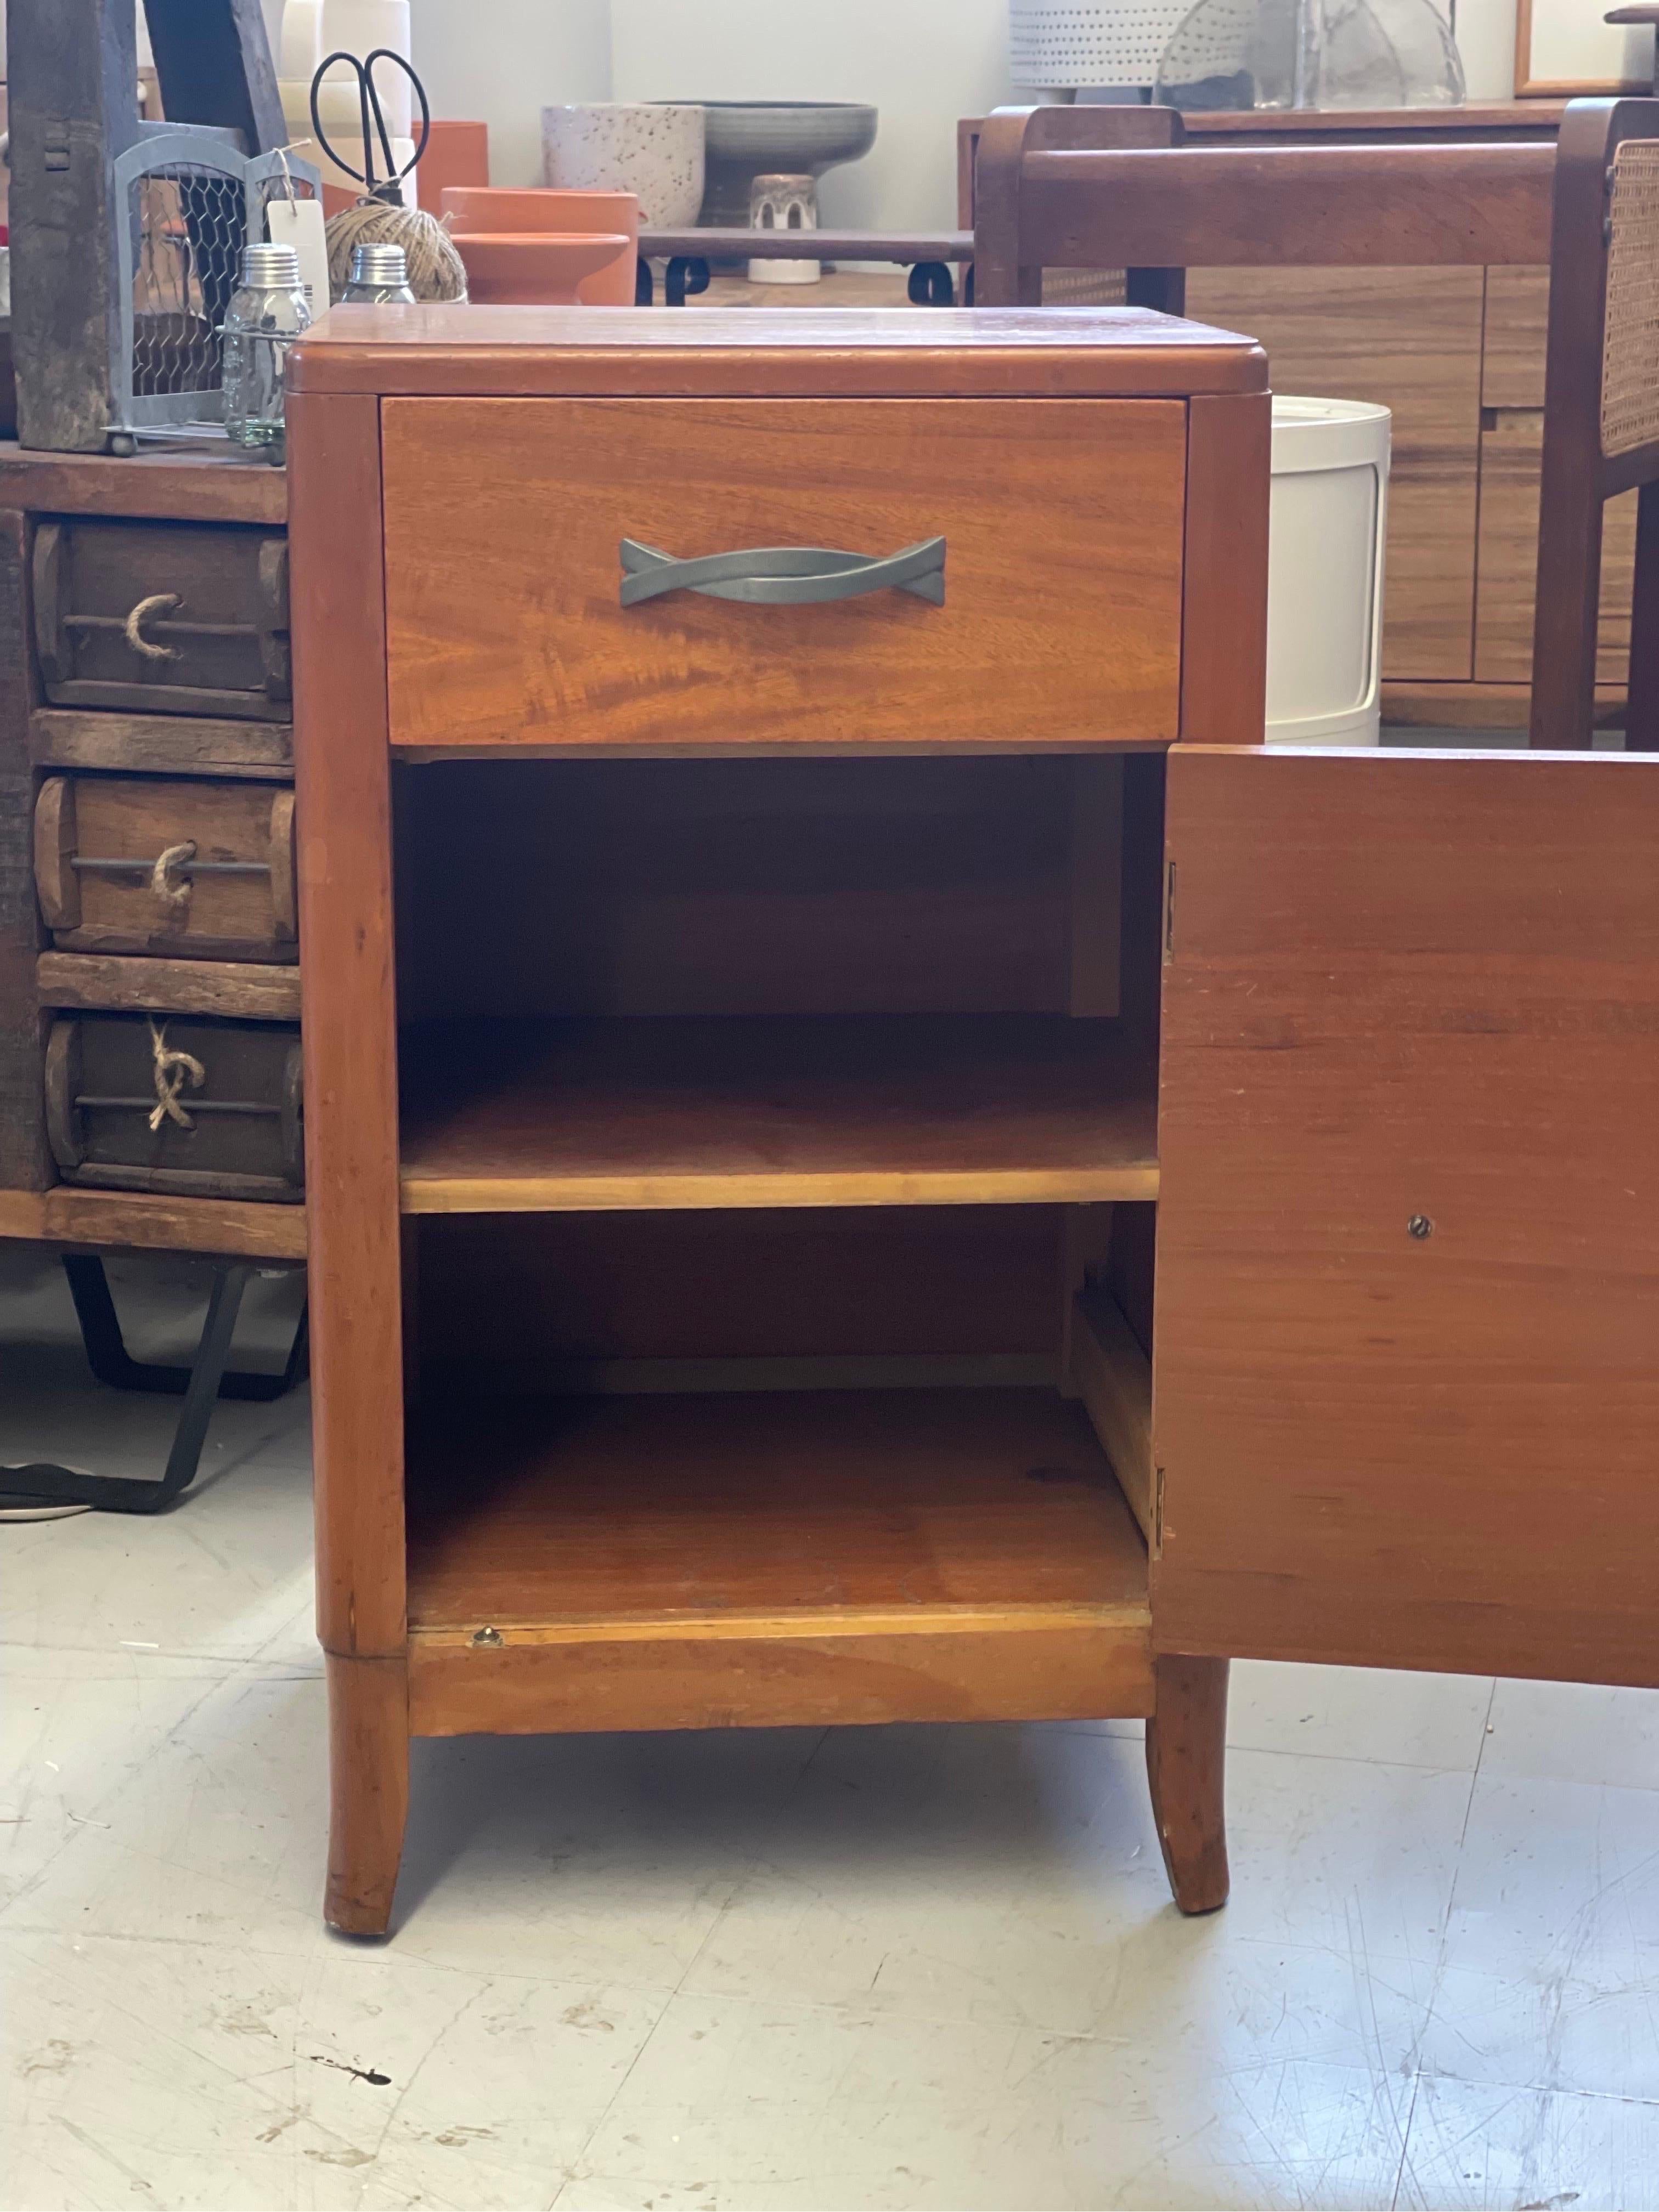 Mid-20th Century Vintage Mid-Century Modern Accent Table Dovetail Drawers Circa 1950s - 1970s. For Sale